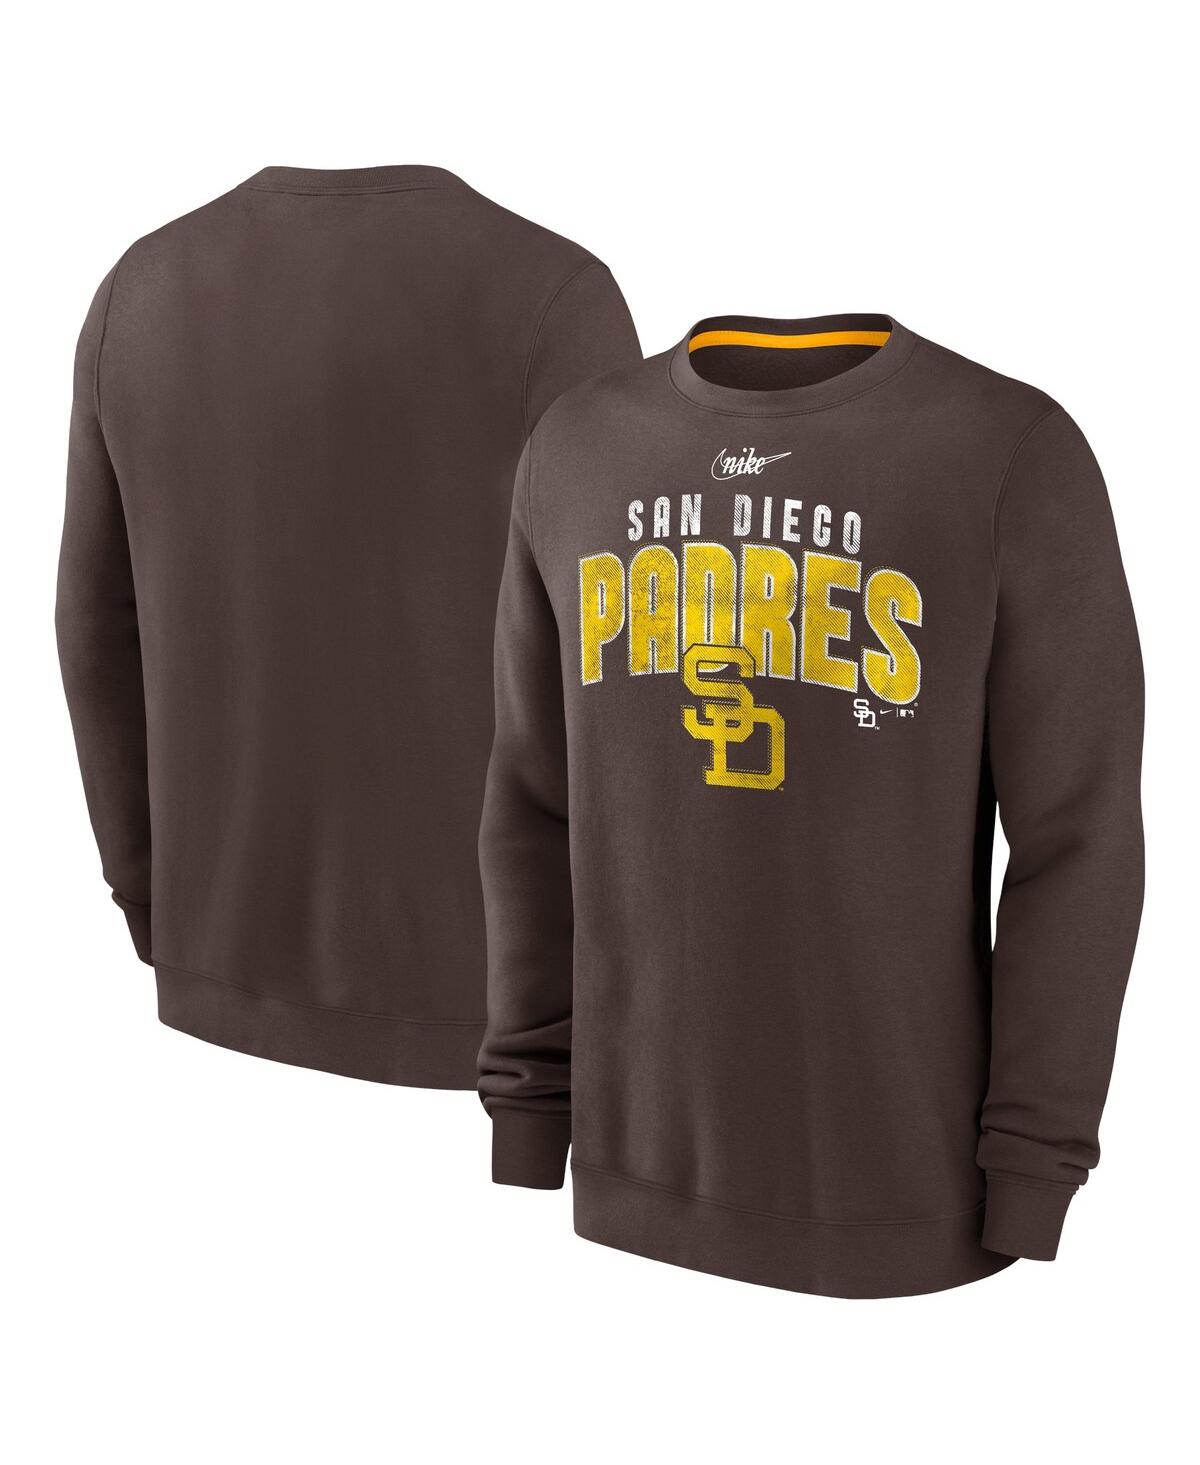 Men's Nike Brown San Diego Padres Cooperstown Collection Team Shout Out Pullover Sweatshirt